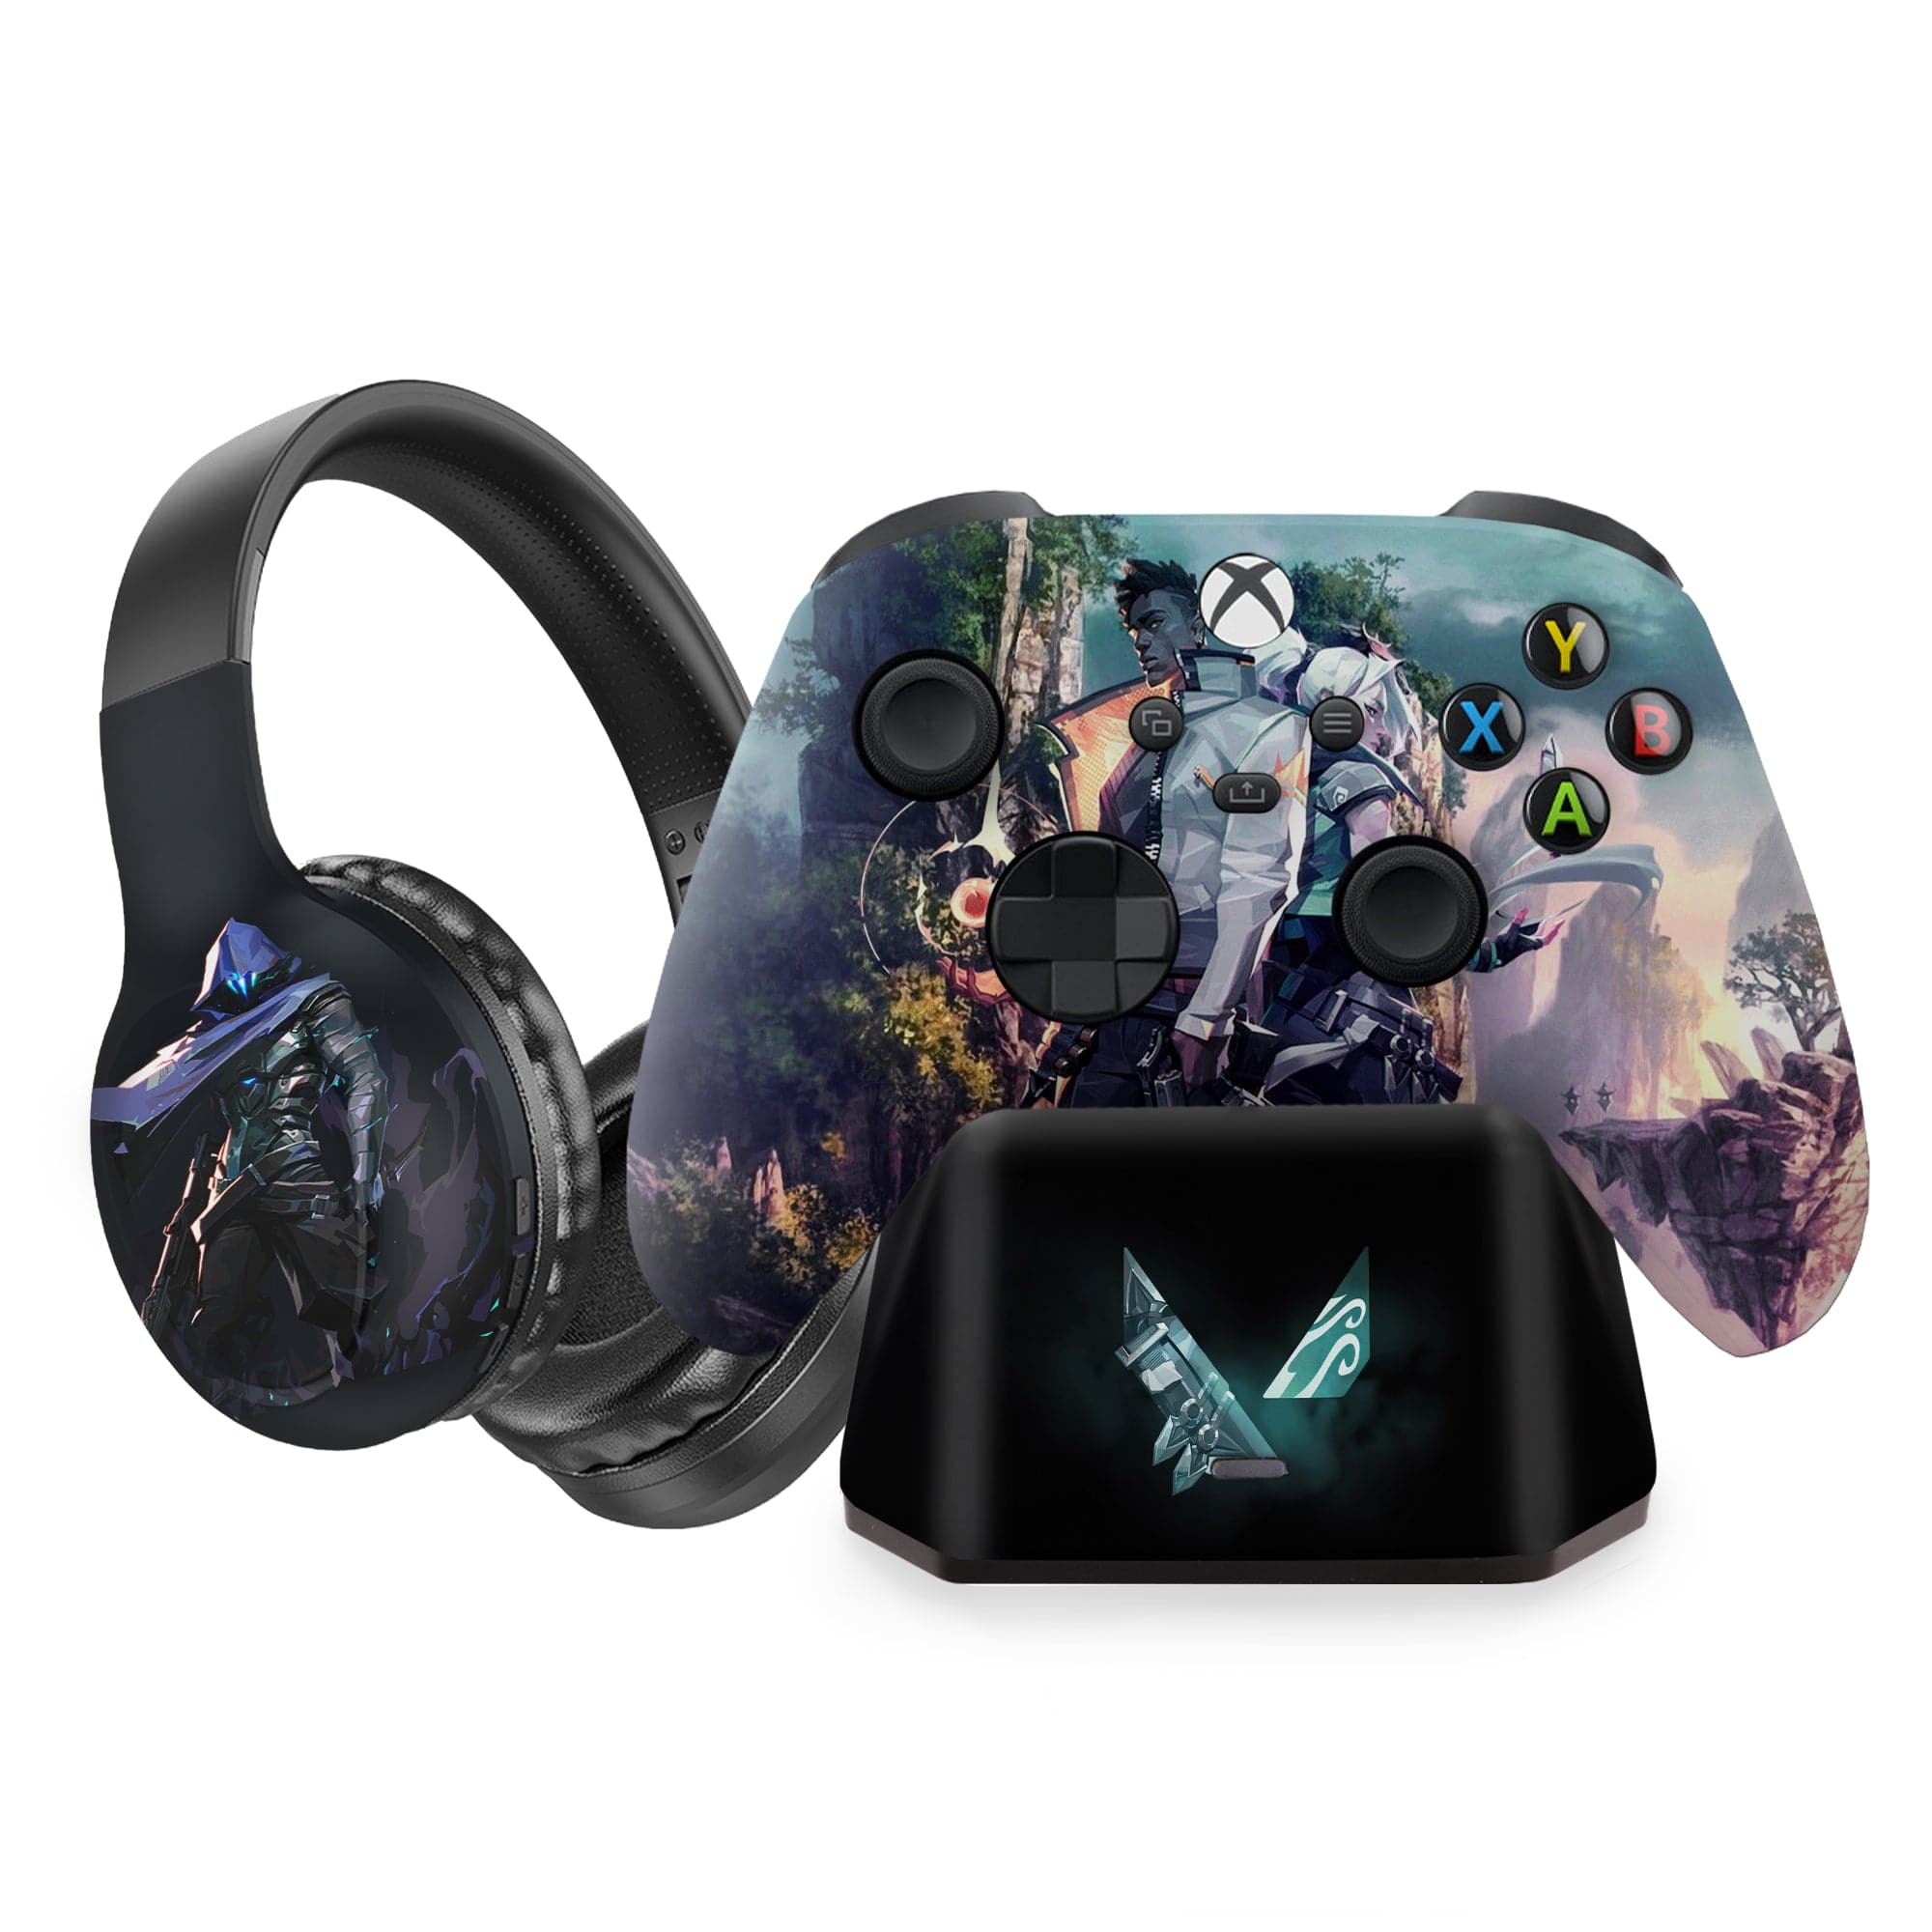 Goku Xbox Series X Controller with Charging Station & Headphone